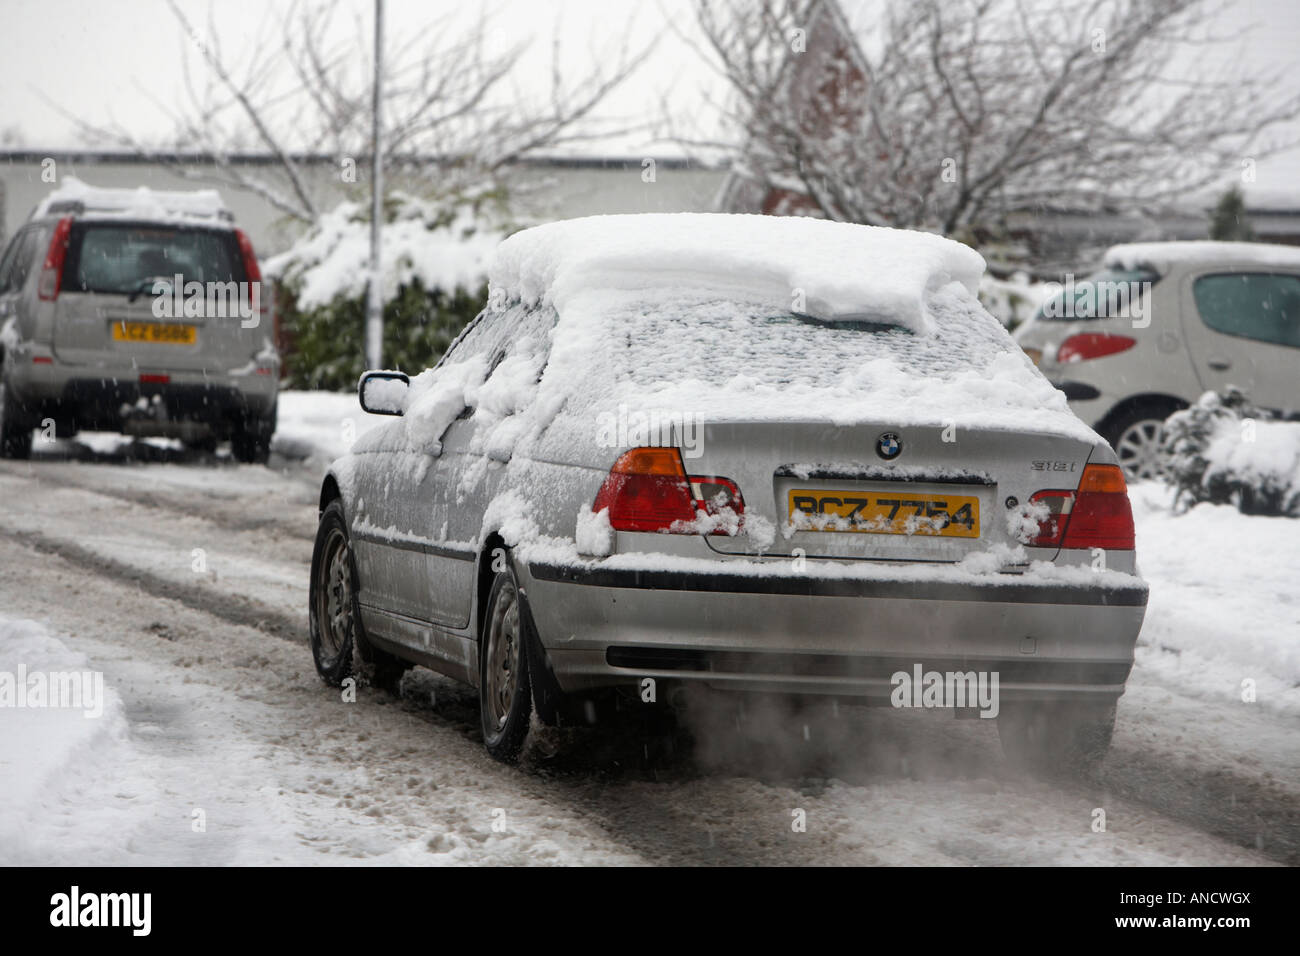 BMW 3 series covered in snow drives slowly along untreated street